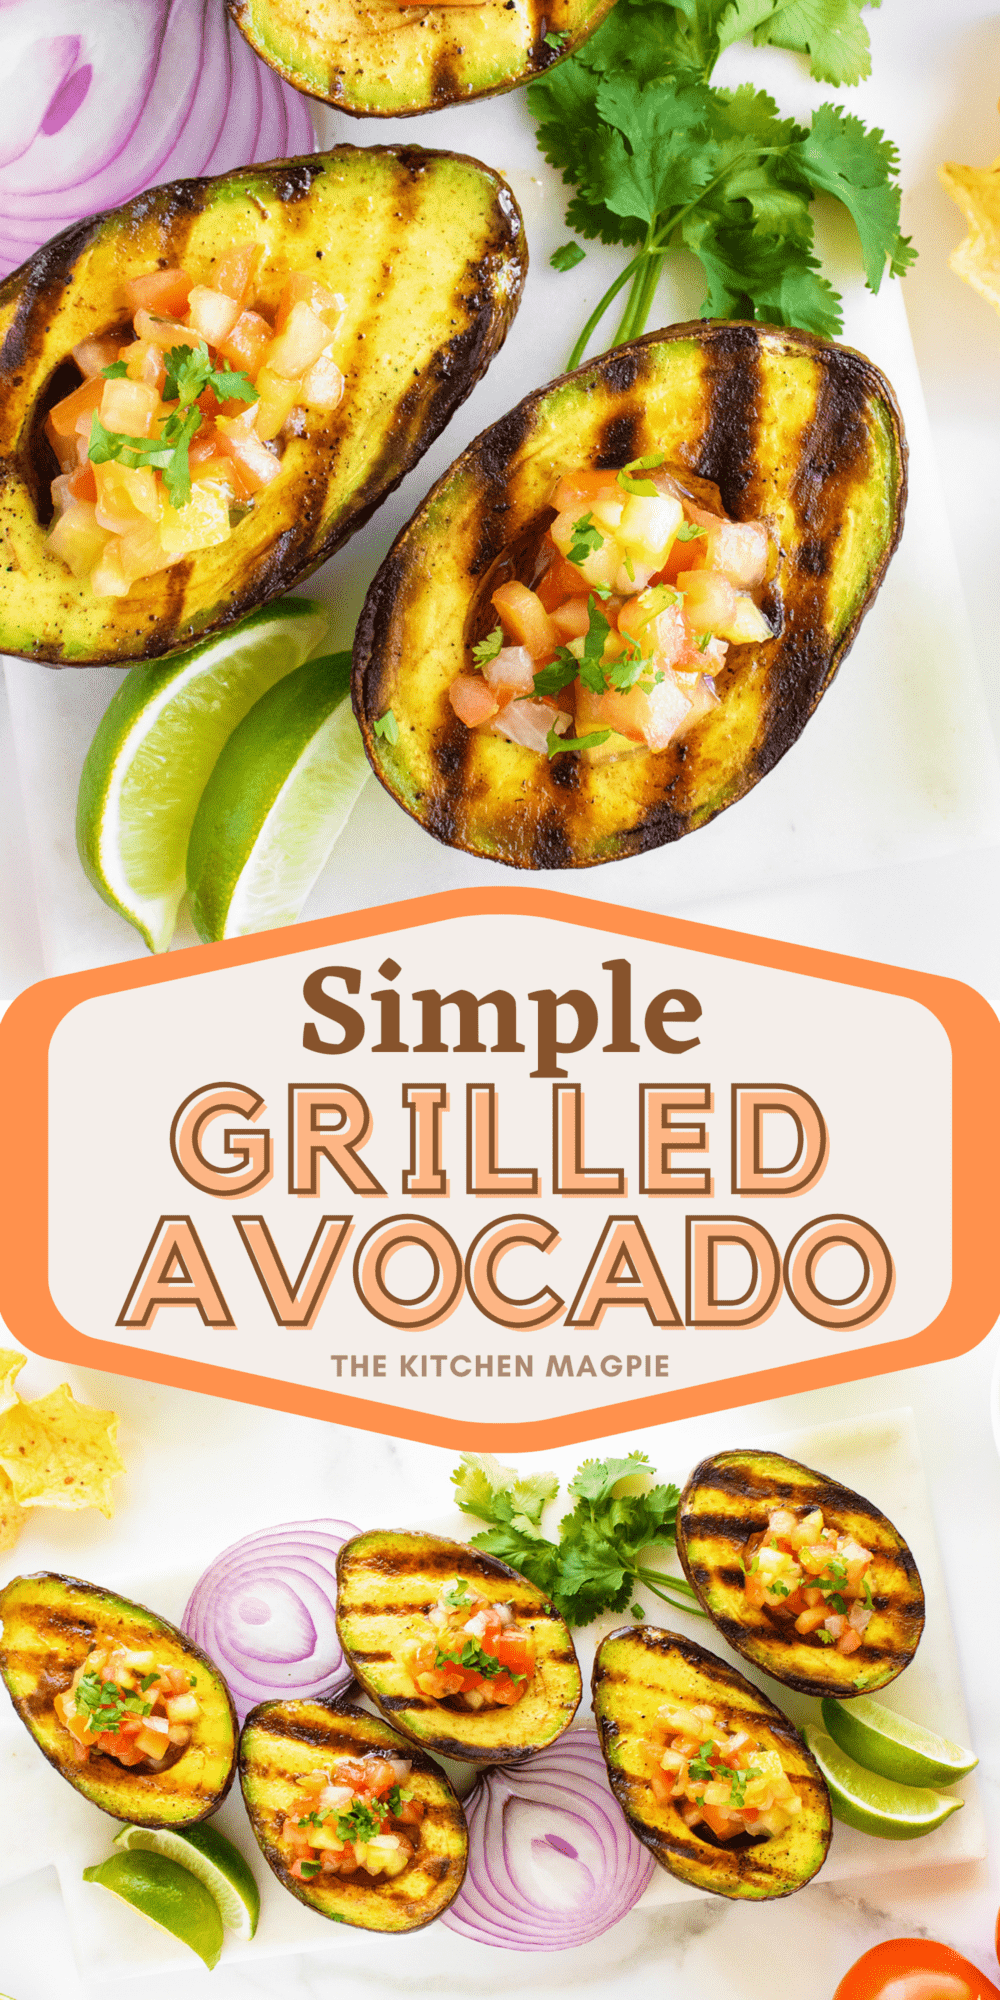 Avocados are sliced, spiced and grilled, then filled with pico de gallo! Fantastic paired with chips for the ultimate appetizer or snack!